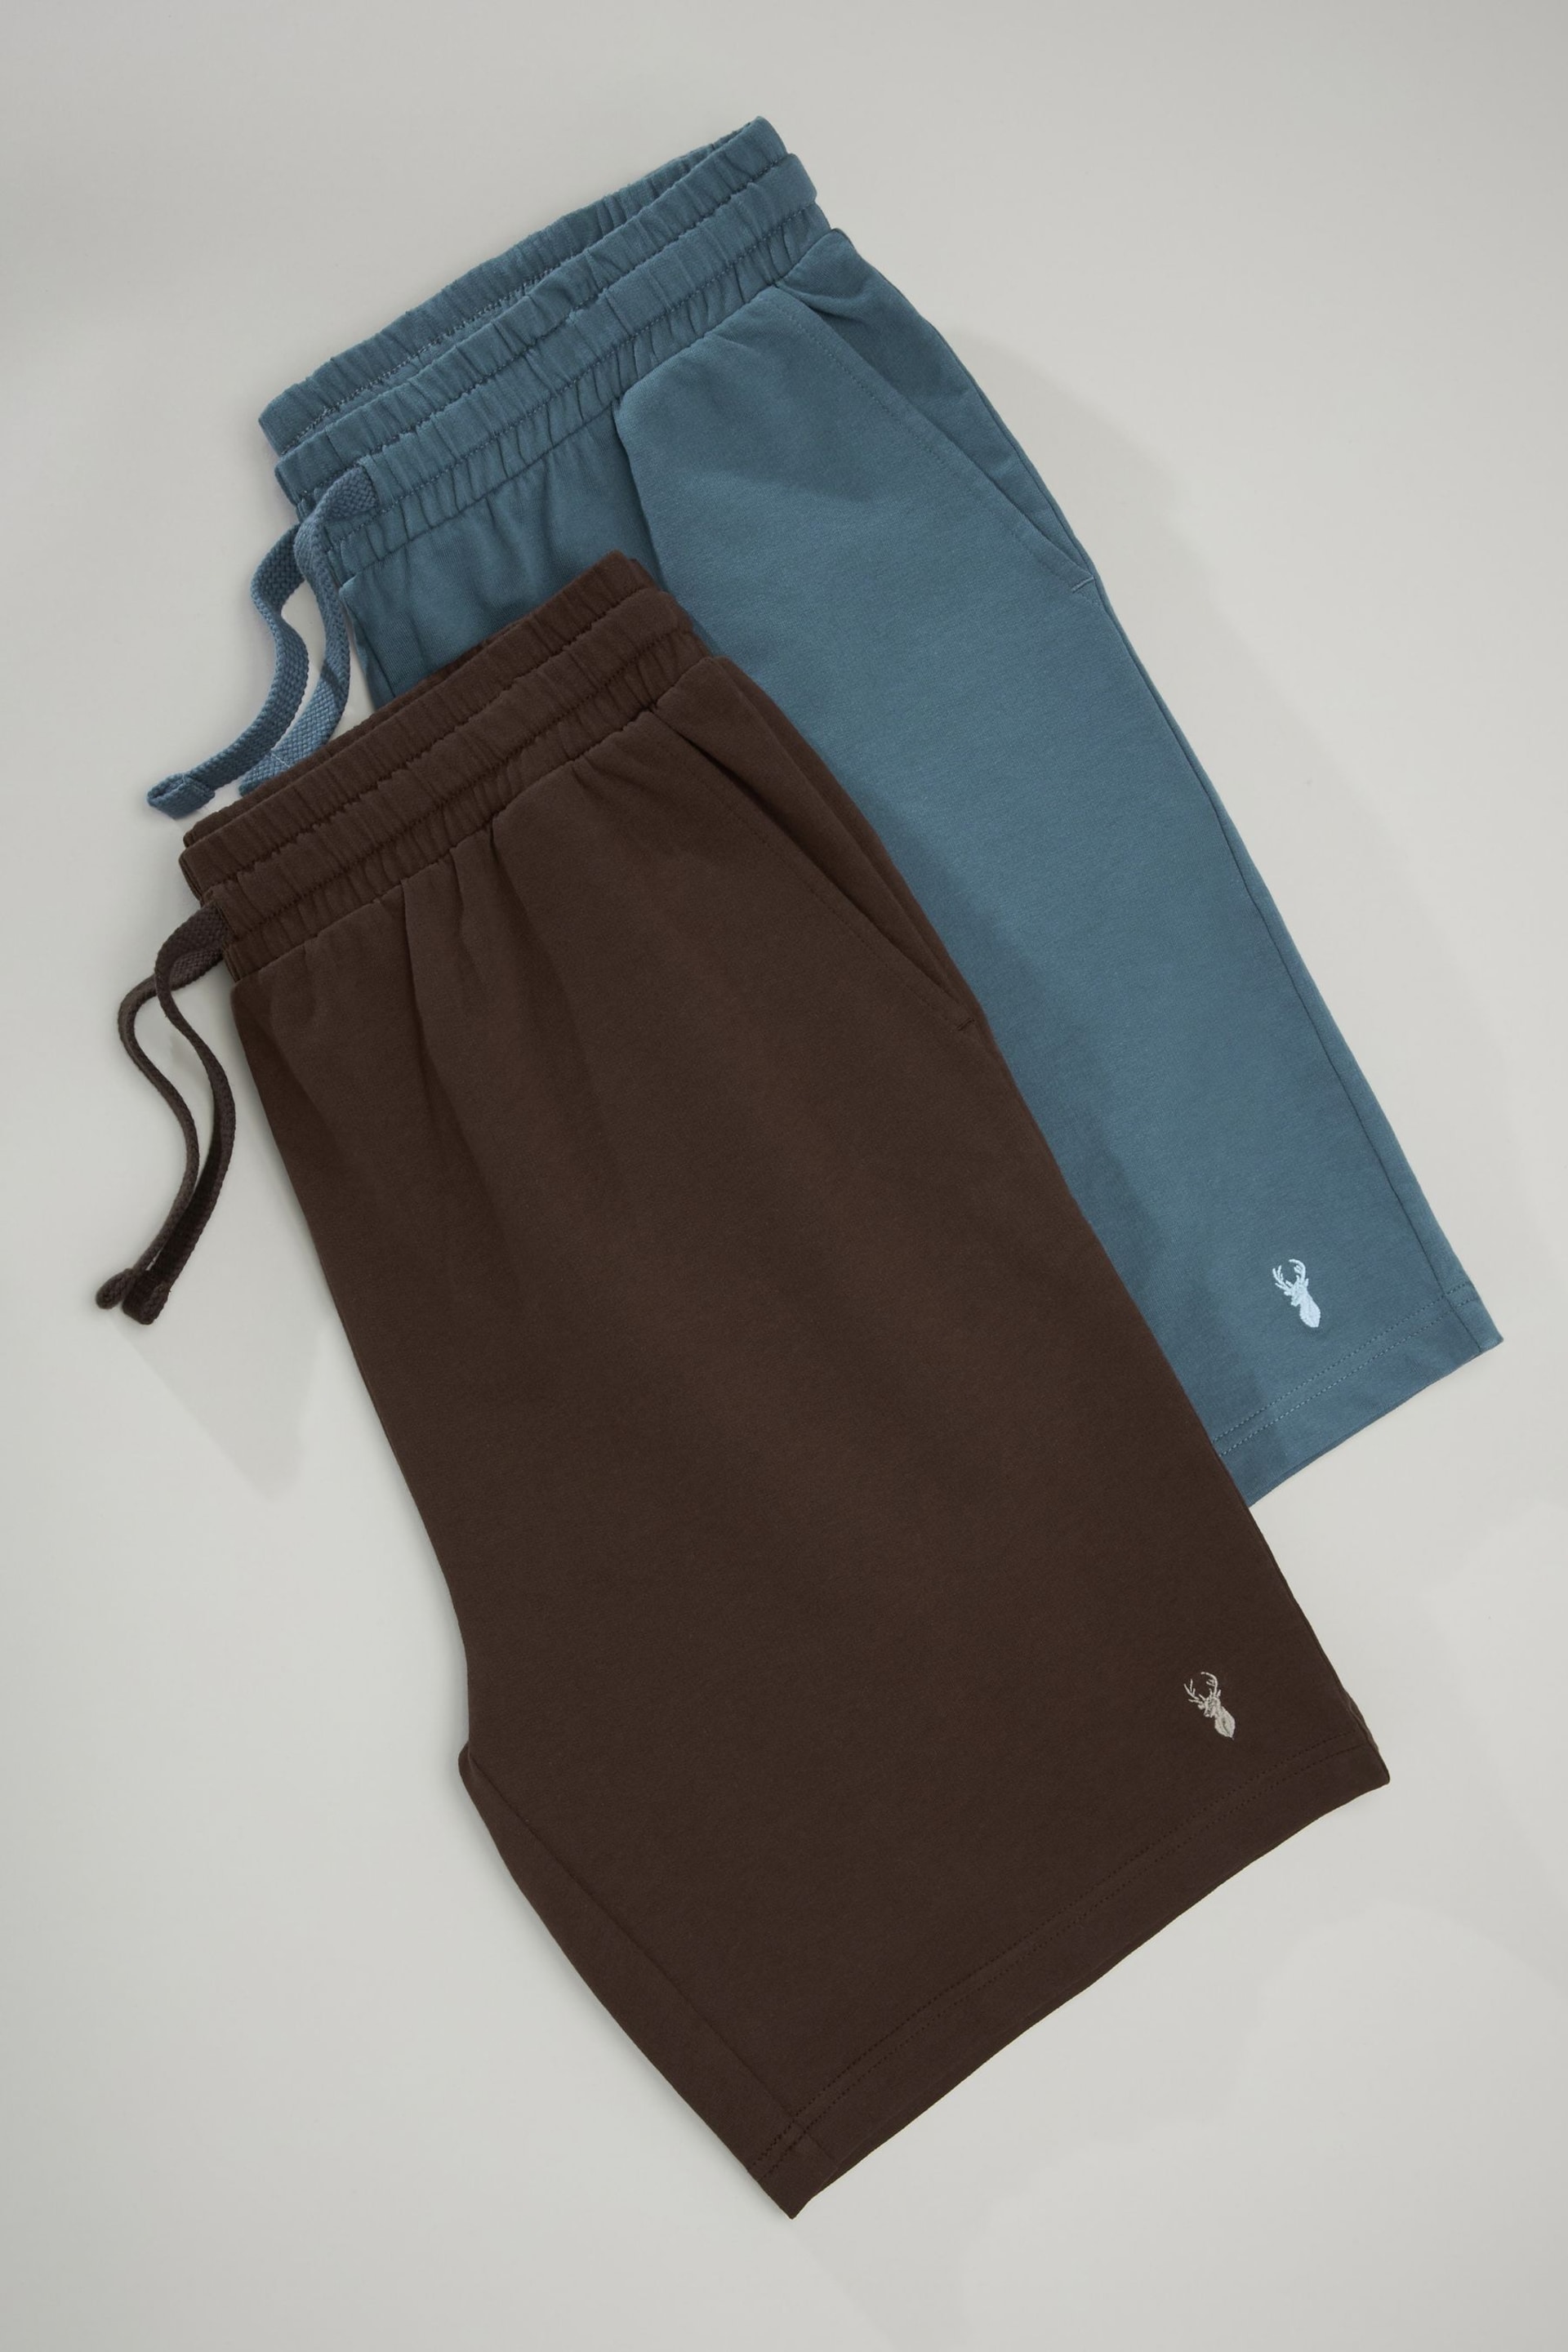 Blue/Brown Lightweight Jogger Shorts 2 Pack - Image 11 of 12